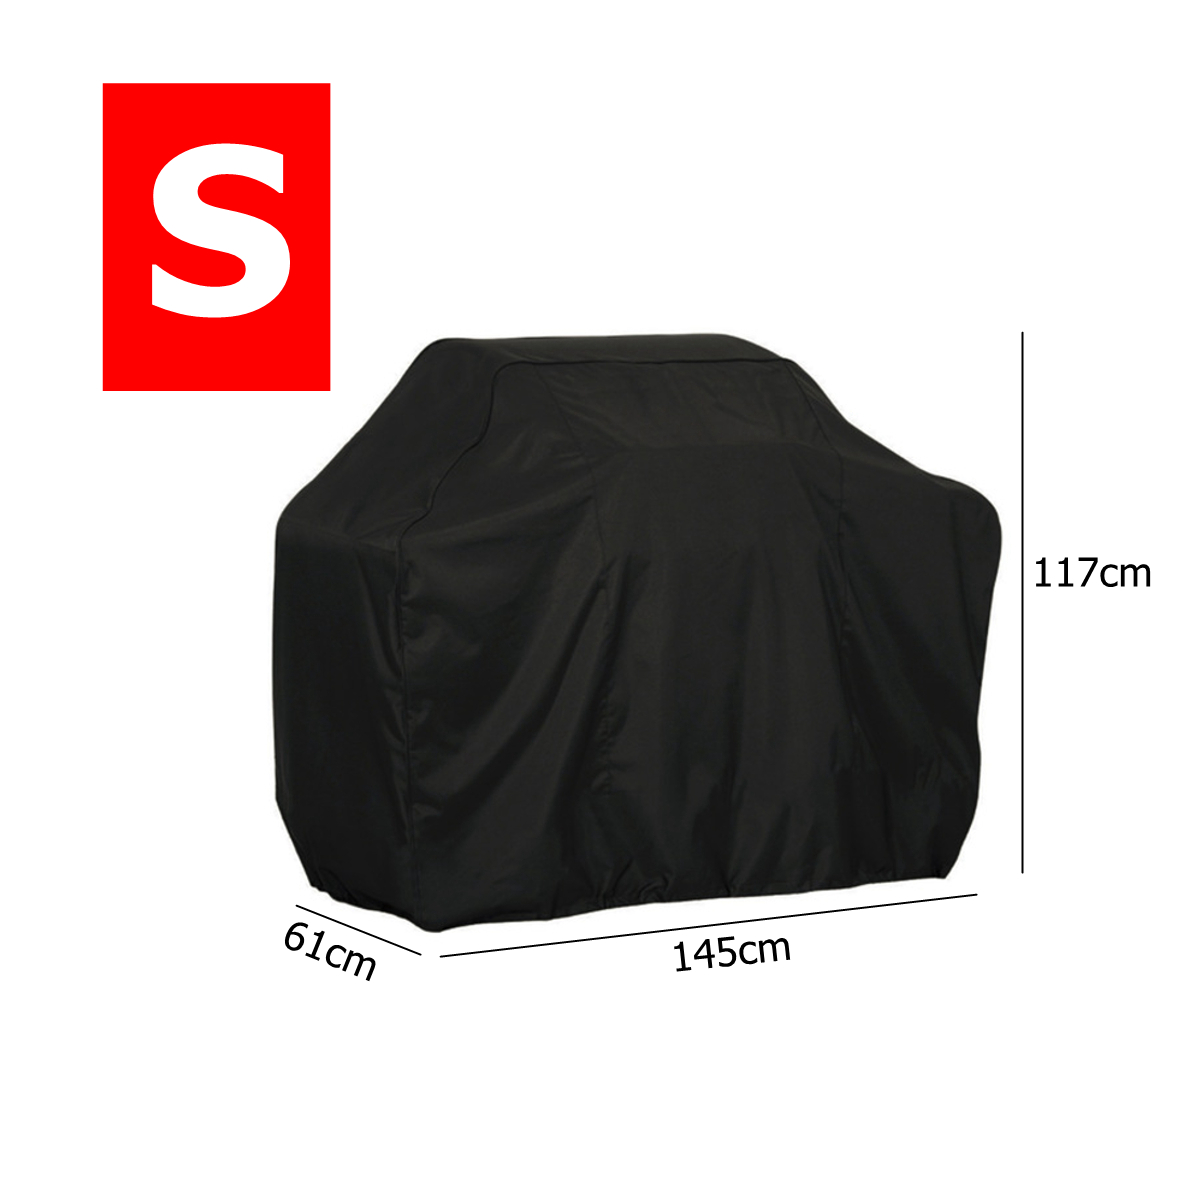 Waterproof-Black-Barbecue-Cover-Anti-Dust-Rain-Cover-Garden-Yard-Grill-Cover-Protector-For-Outdoor-B-1742519-5